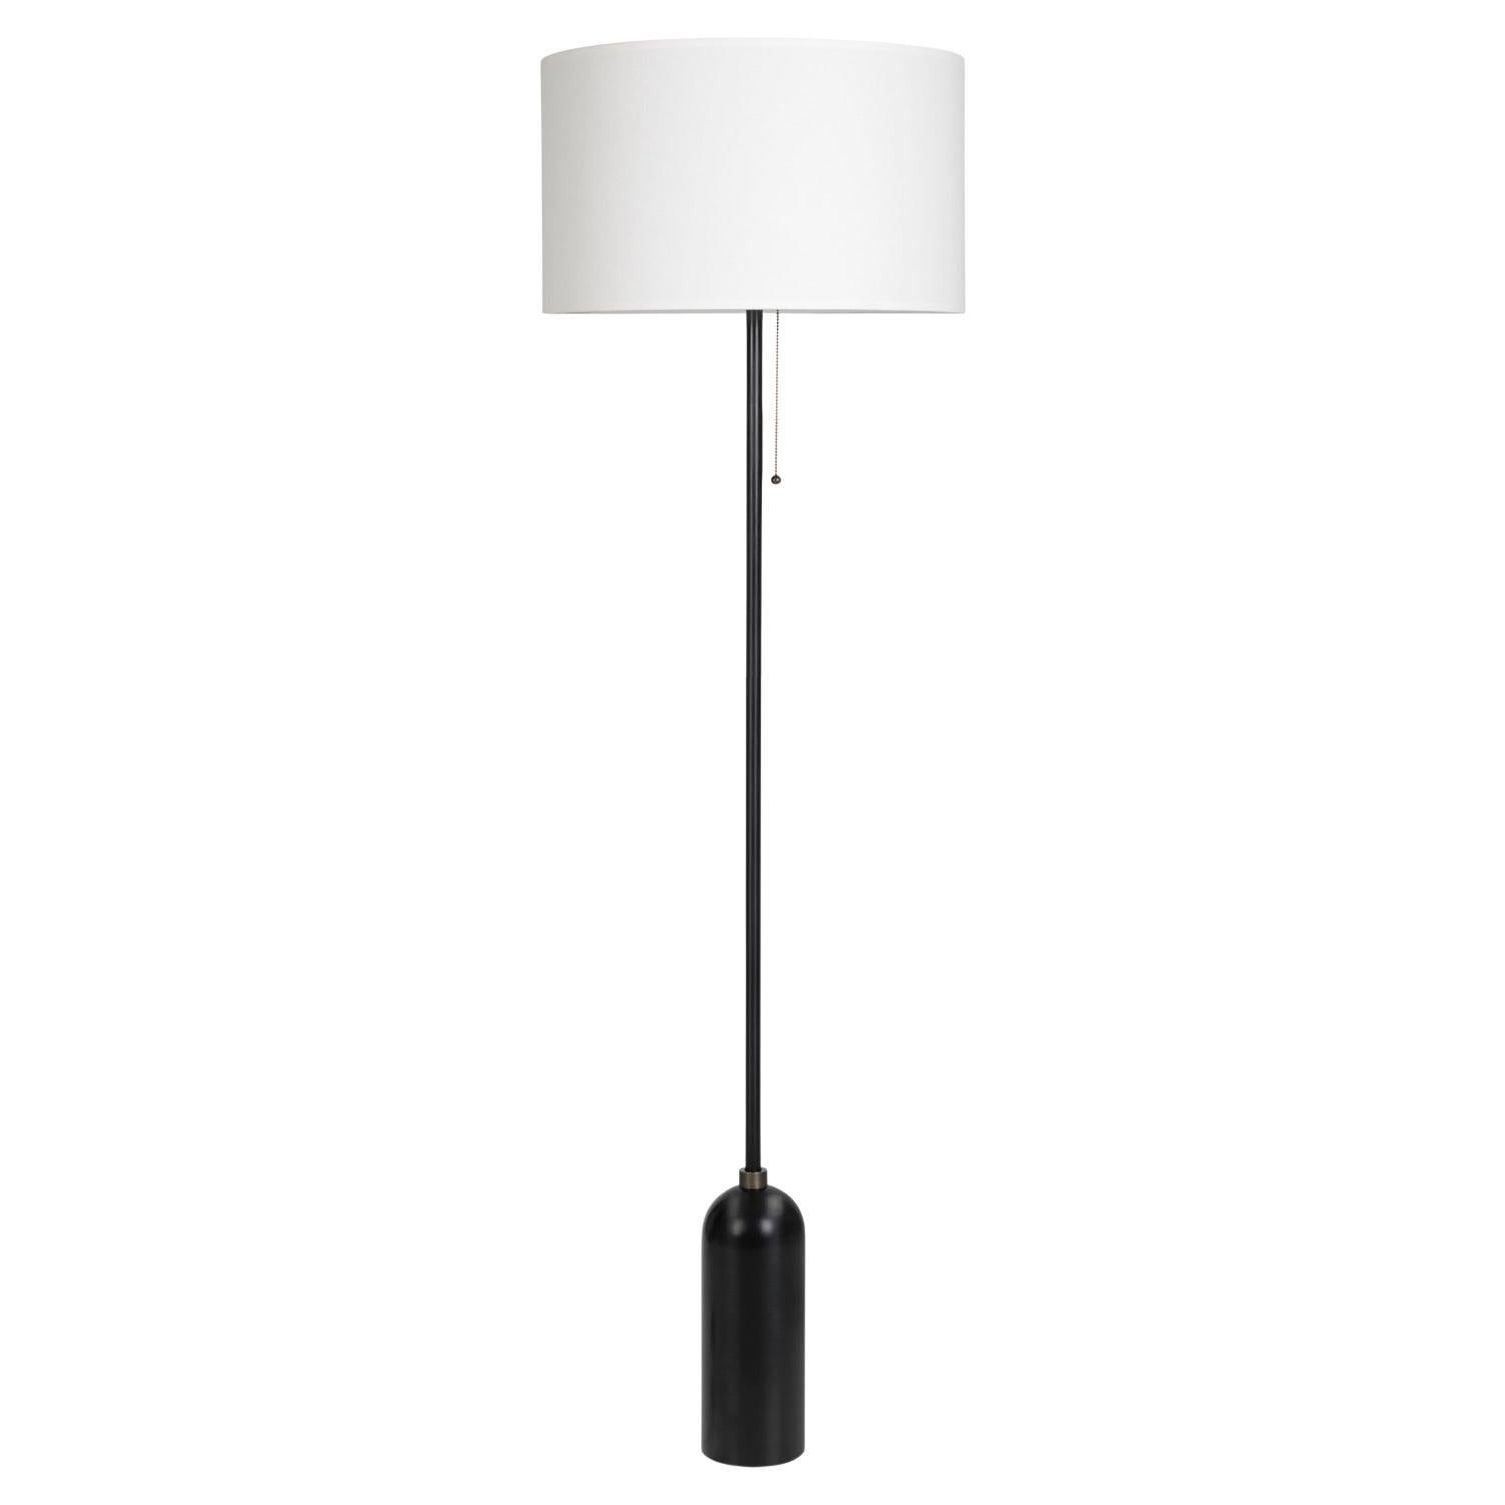 Latest Gravity' Blackened Steel Floor Lamp For Gubi With White Shade For Sale At  1stdibs Within Steel Floor Lamps (View 12 of 15)